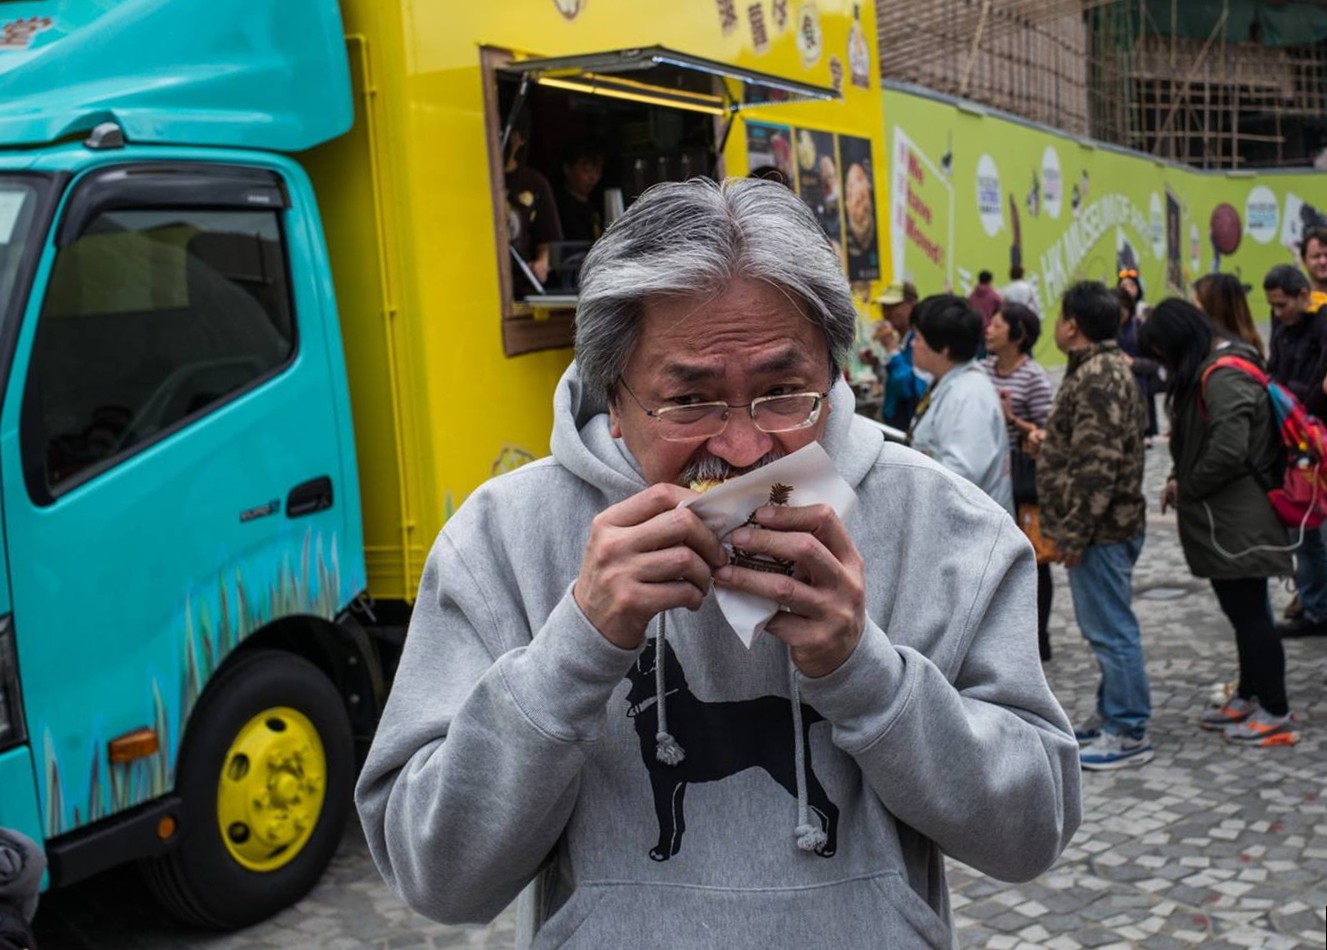 John Tsang, who as financial secretary proposed the idea in his 2015 budget, visits a food truck at Tsim Sha Tsui while campaigning for the Hong Kong chief executive election, on February 4. Photo: Facebook